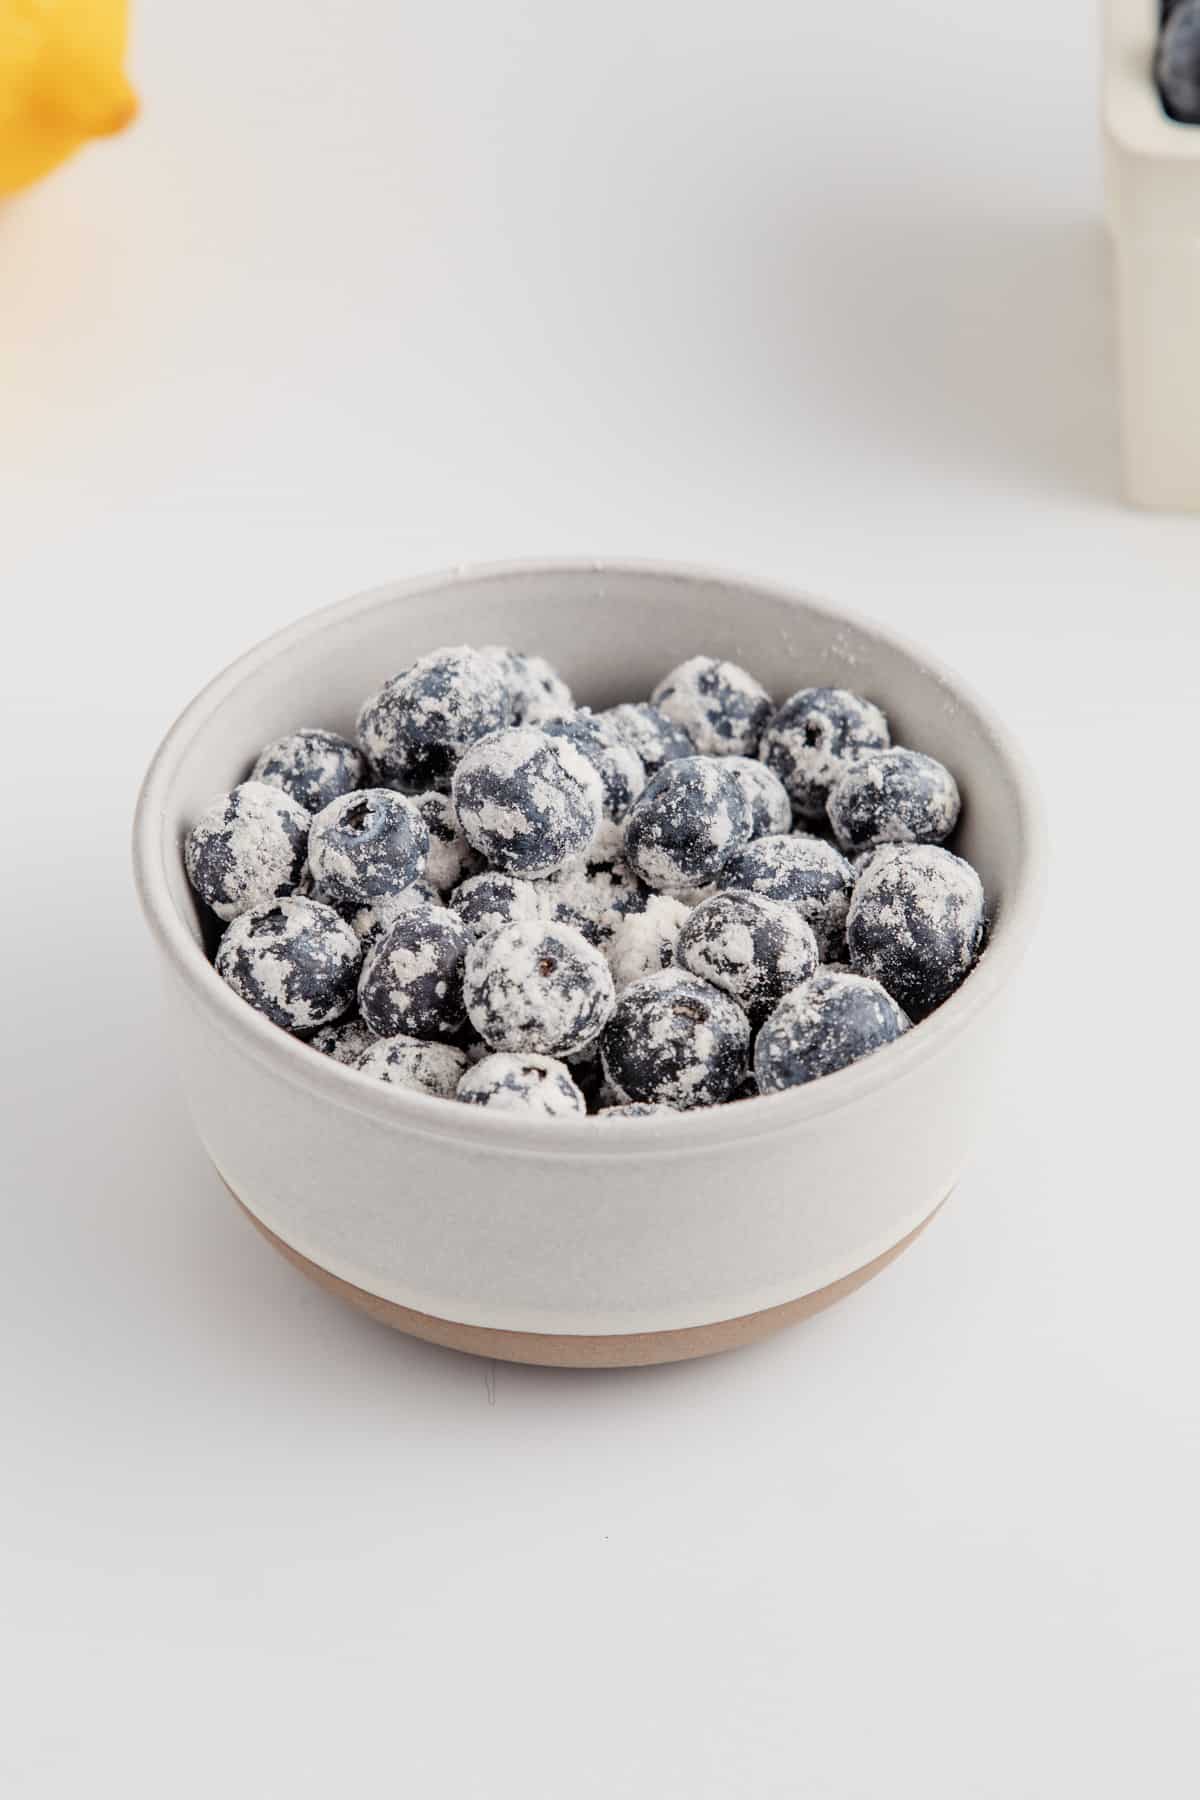 Blueberries in a bowl tossed with flour.